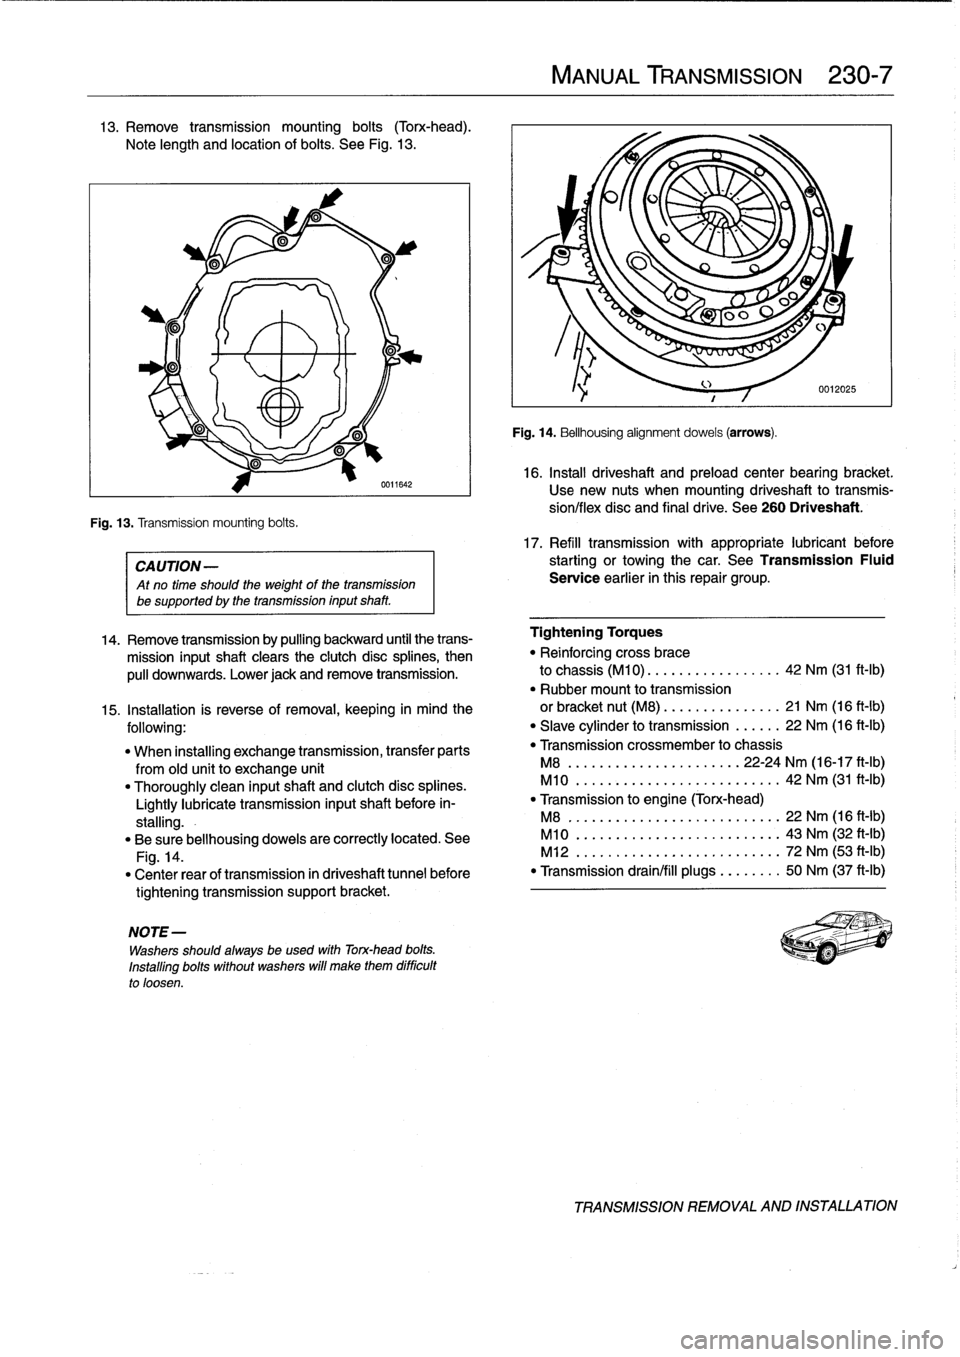 BMW 323i 1996 E36 Workshop Manual 13
.
Remove
transmission
mounting
bolts
(Torx-head)
.

Note
length
and
location
of
bolts
.
See
Fig
.
13
.

Fig
.
13
.
Transmission
mounting
bolts
.

0611642

CA
UTION-

Atno
time
should
the
weight
of
